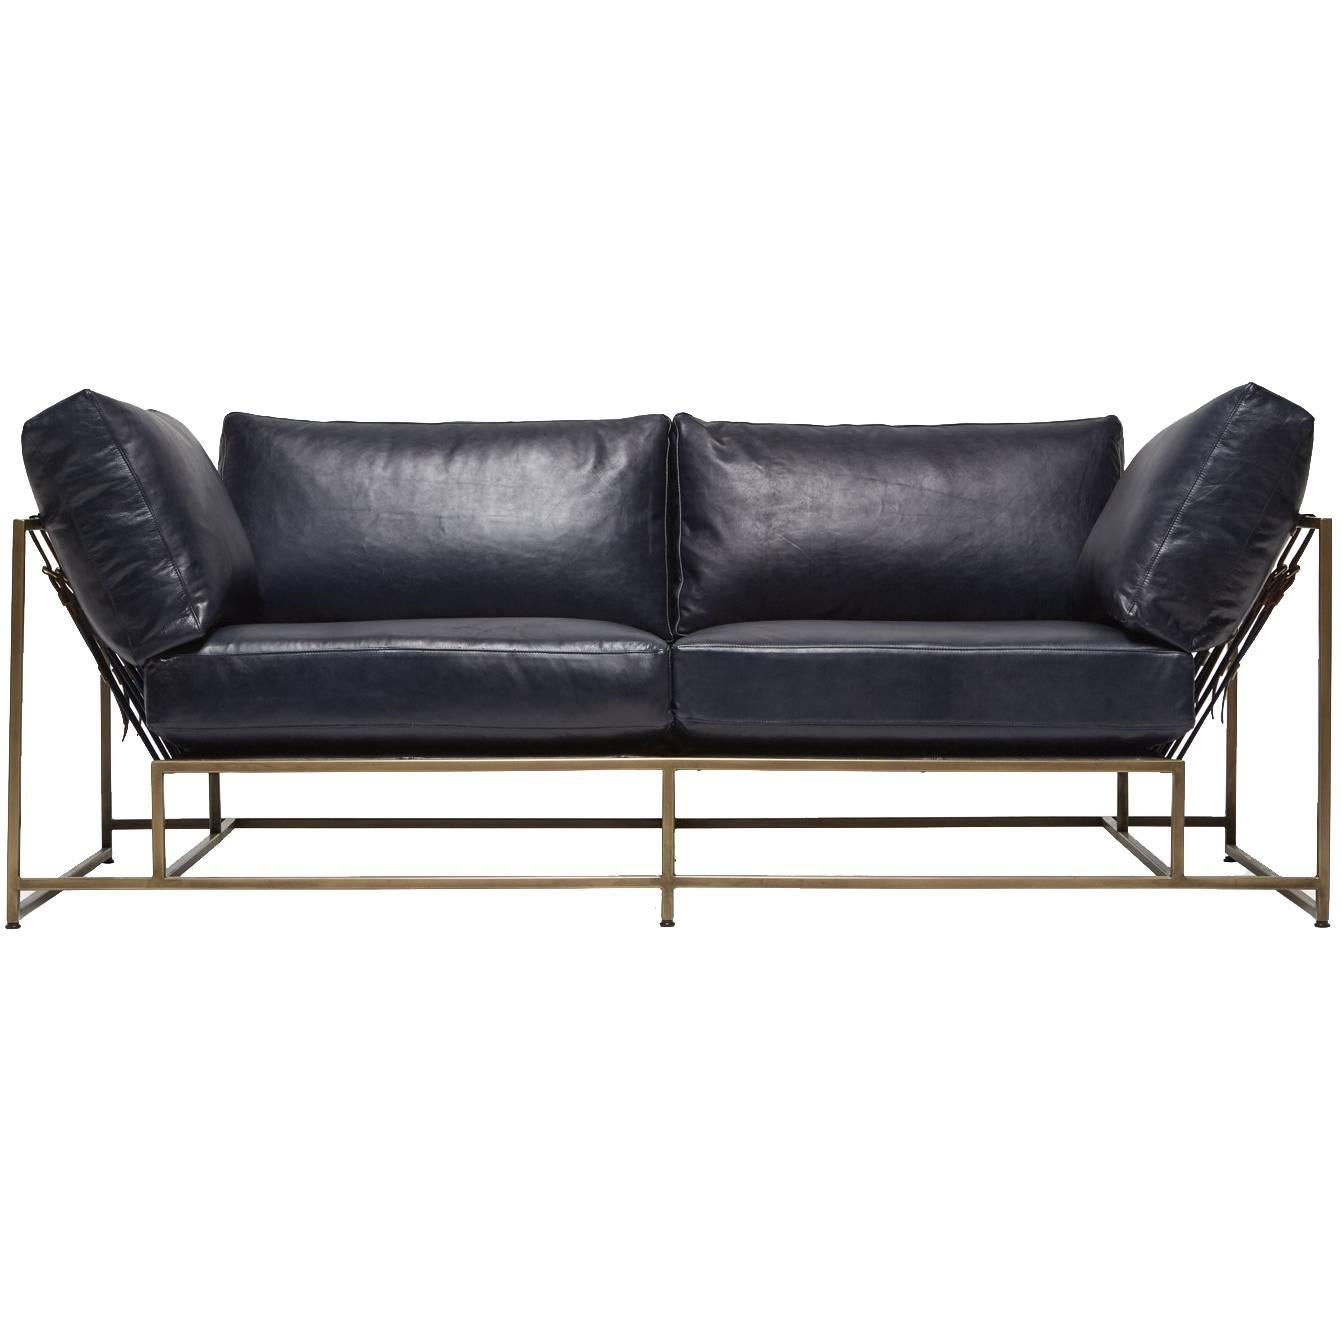 Indigo Leather and Antique Brass Two Seat Sofa